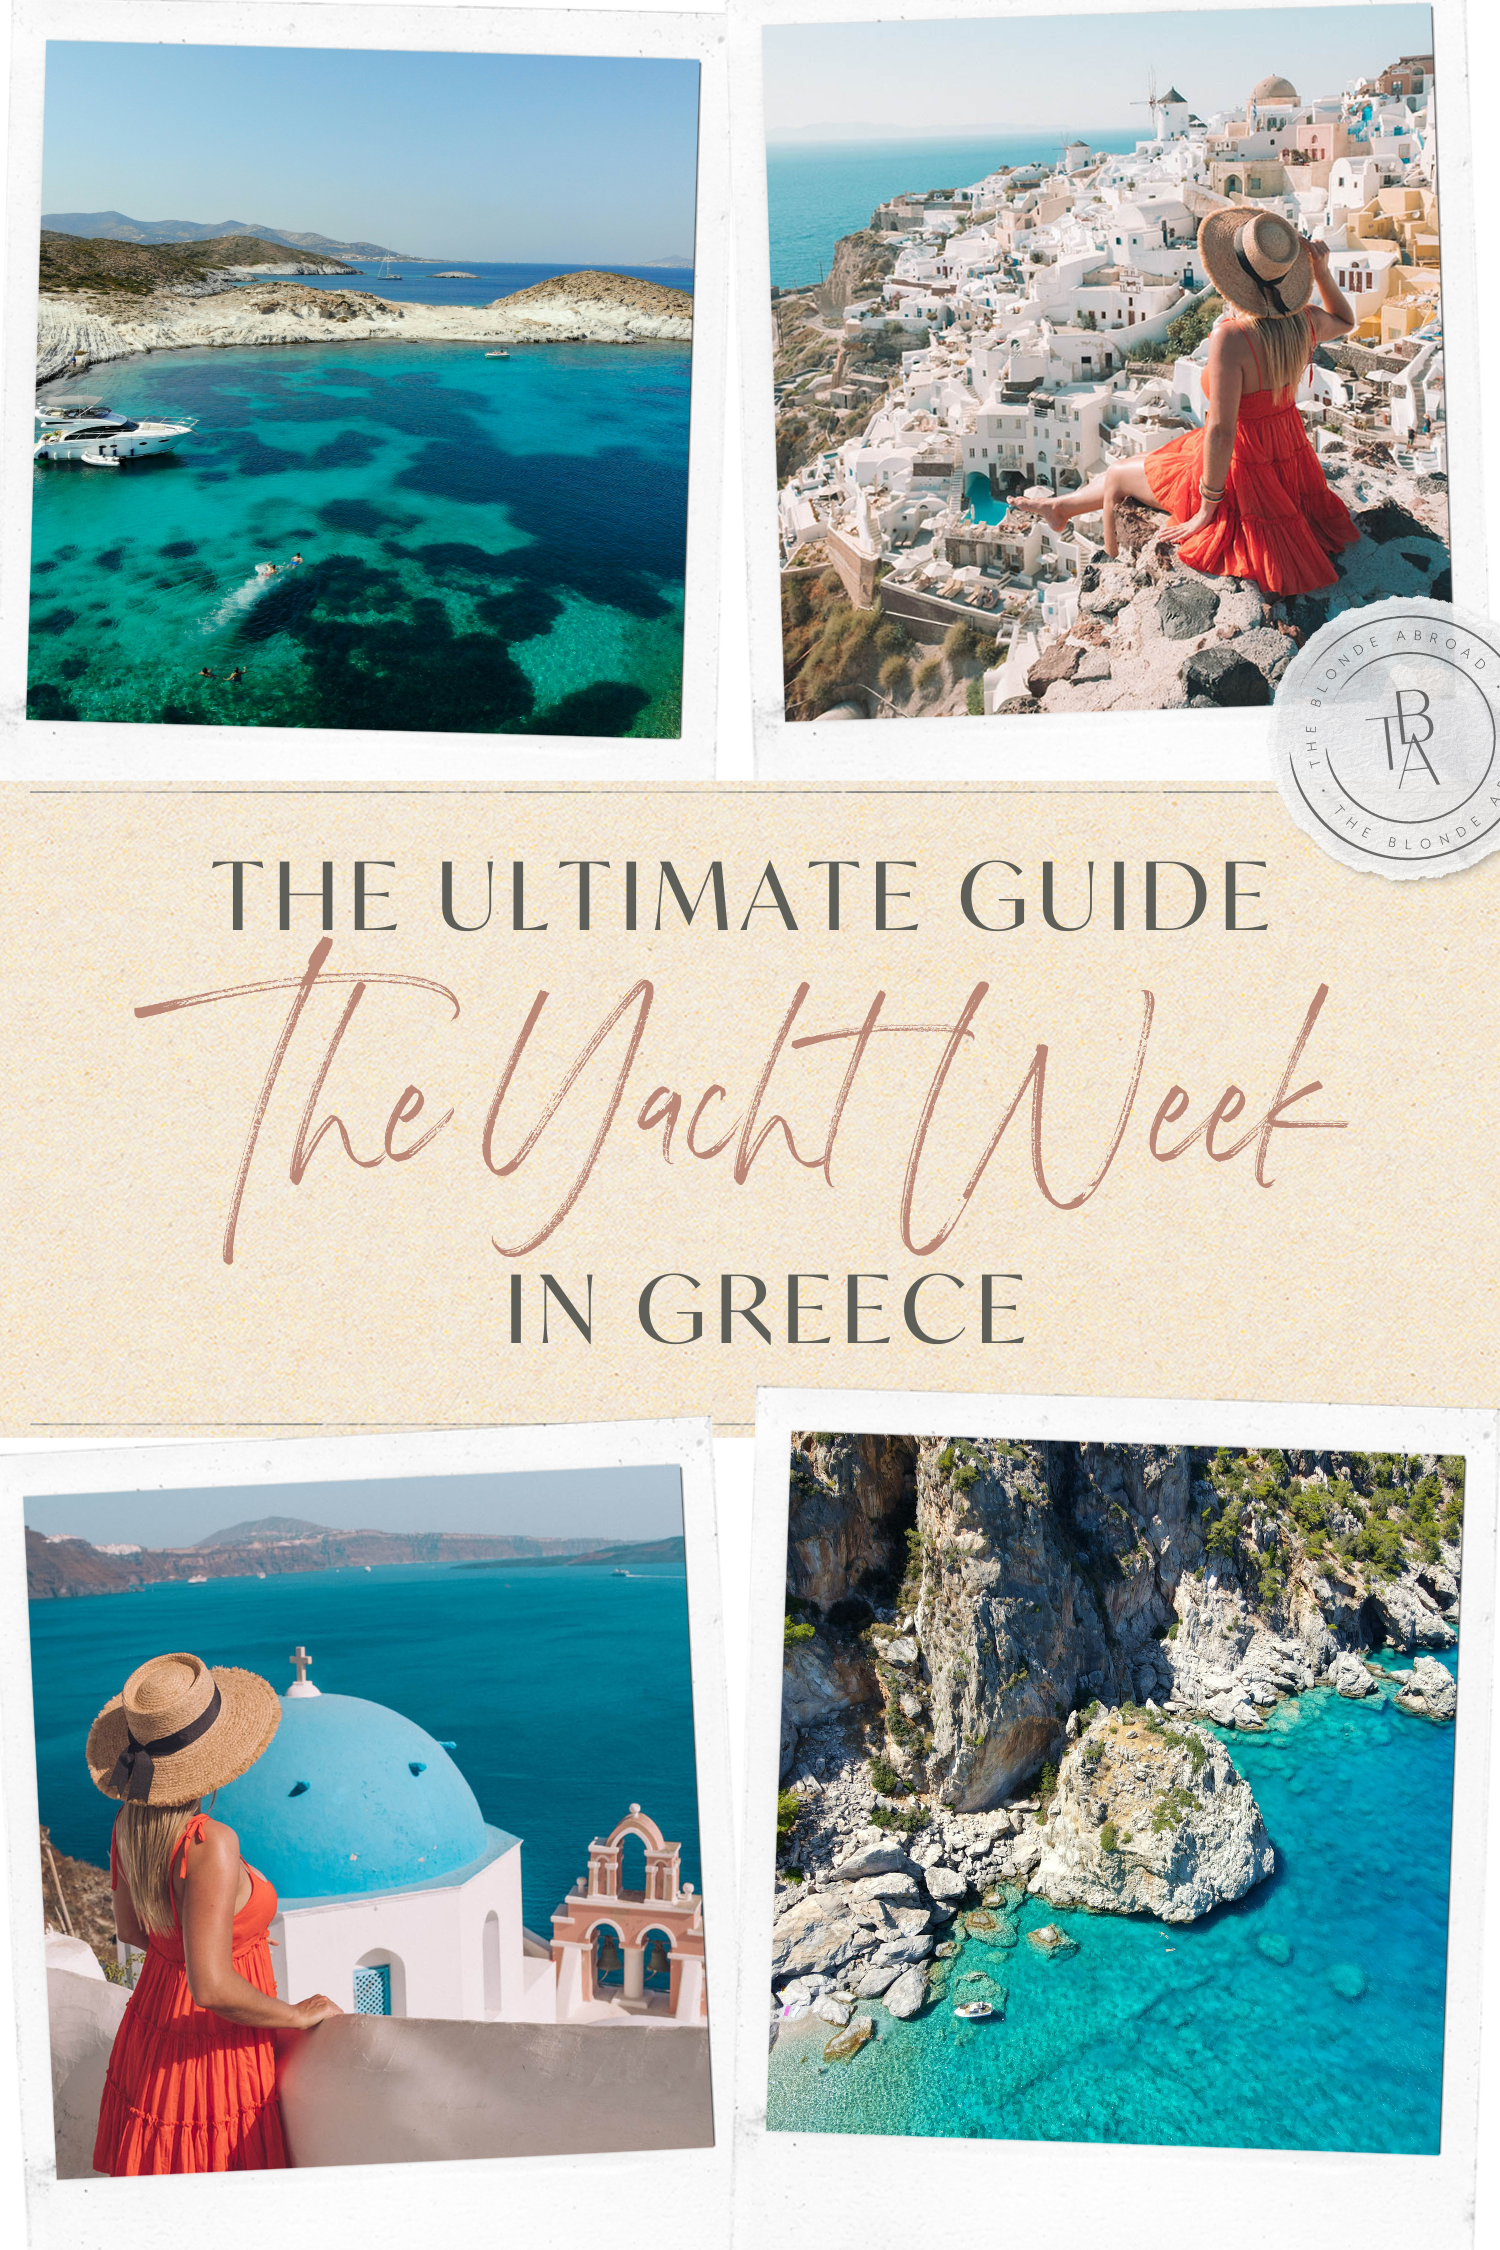 The Ultimate Guide to The Yacht Week Greece
